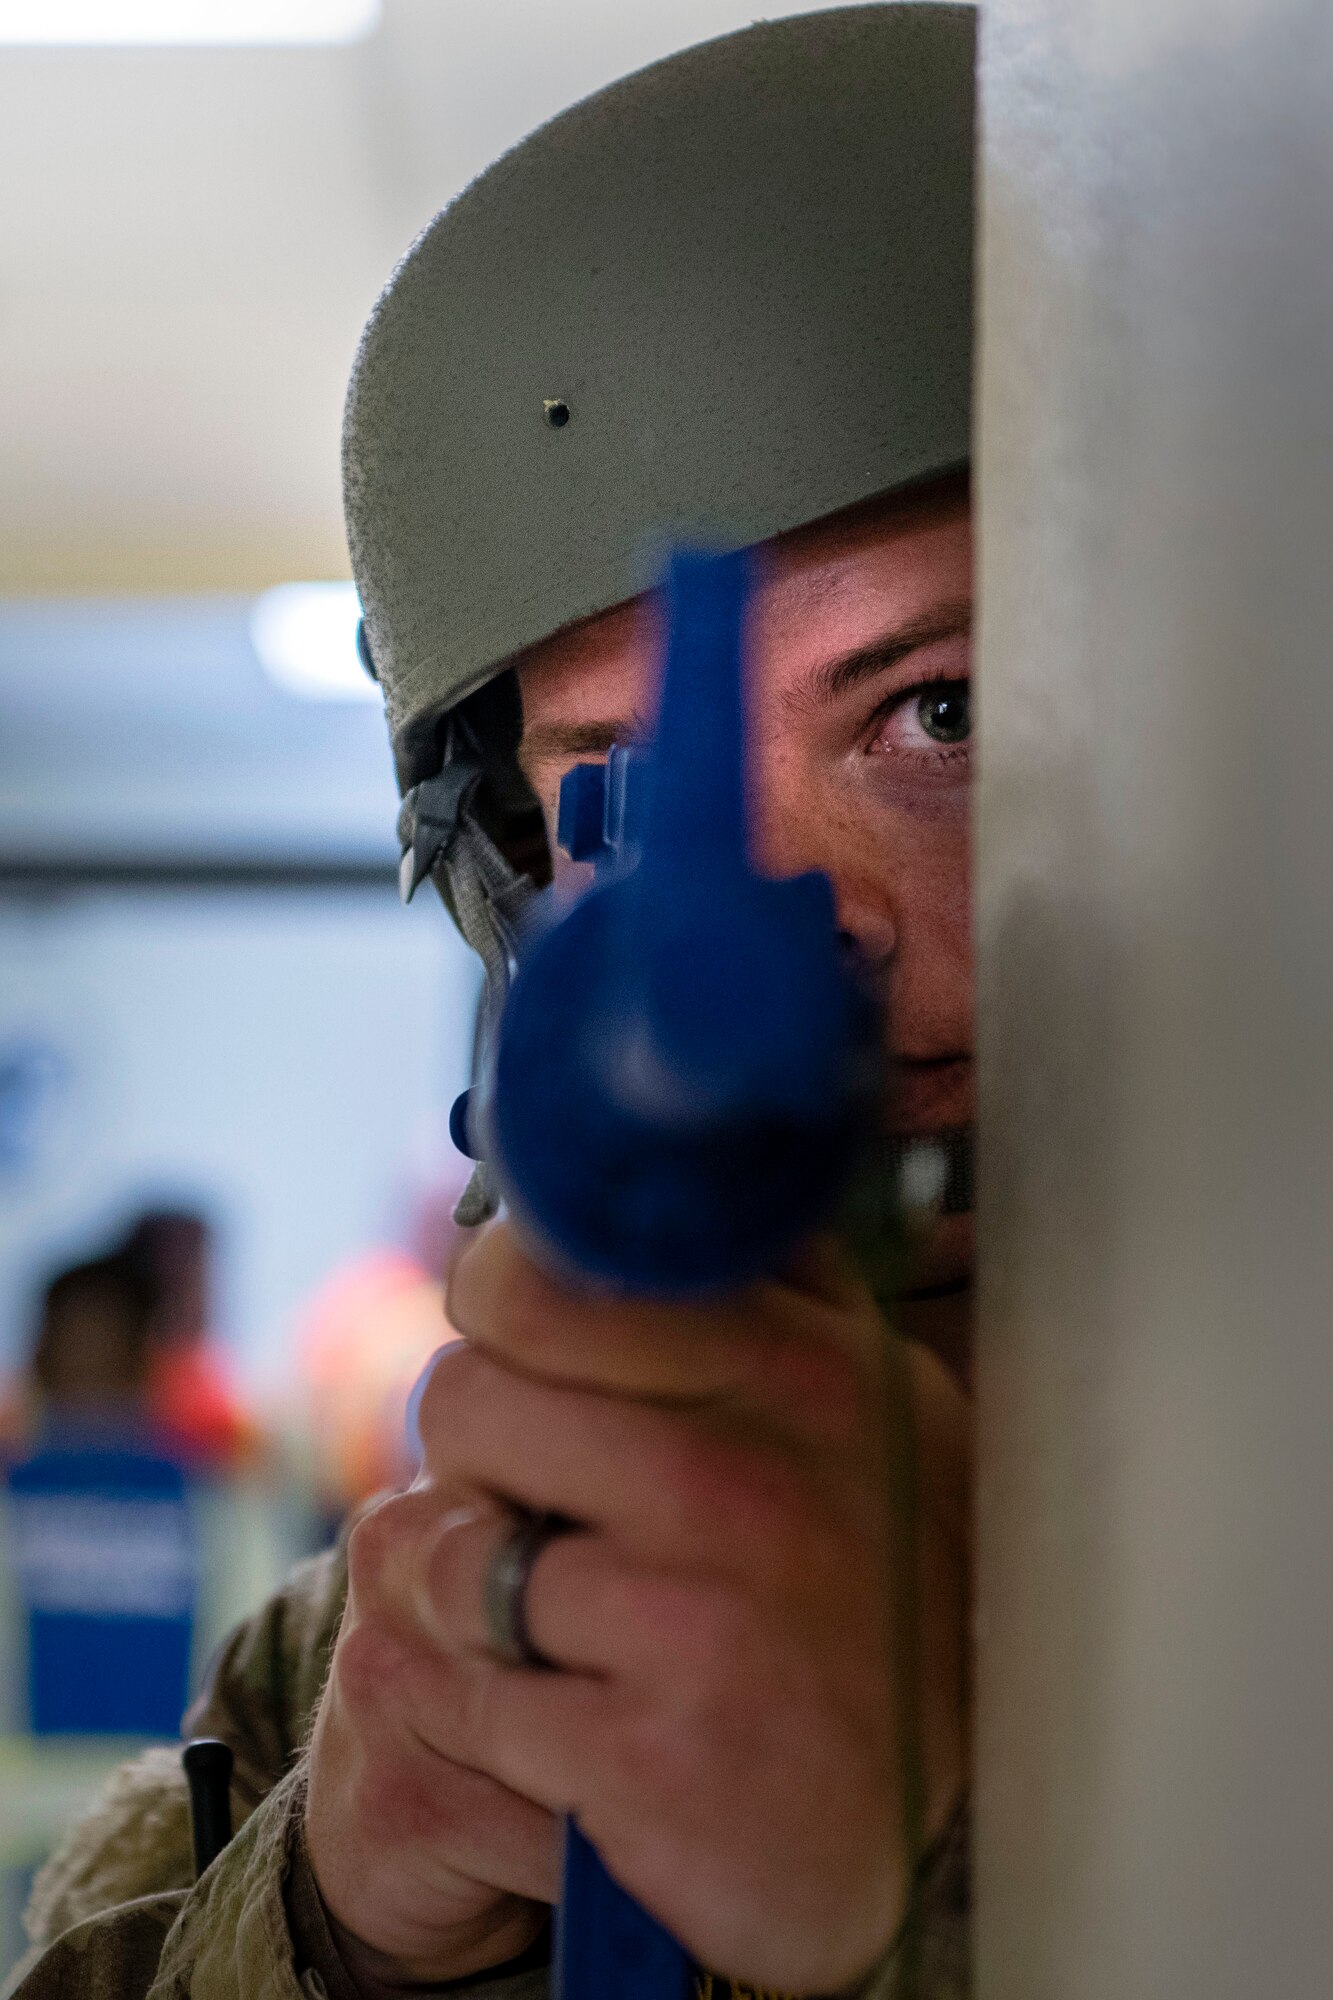 Senior Airman Gaige Bullard, 902nd Security Forces Squadron, scans a hallway during an active shooter exercise on Aug 28, 2019, at Joint Base San Antonio-Randolph.